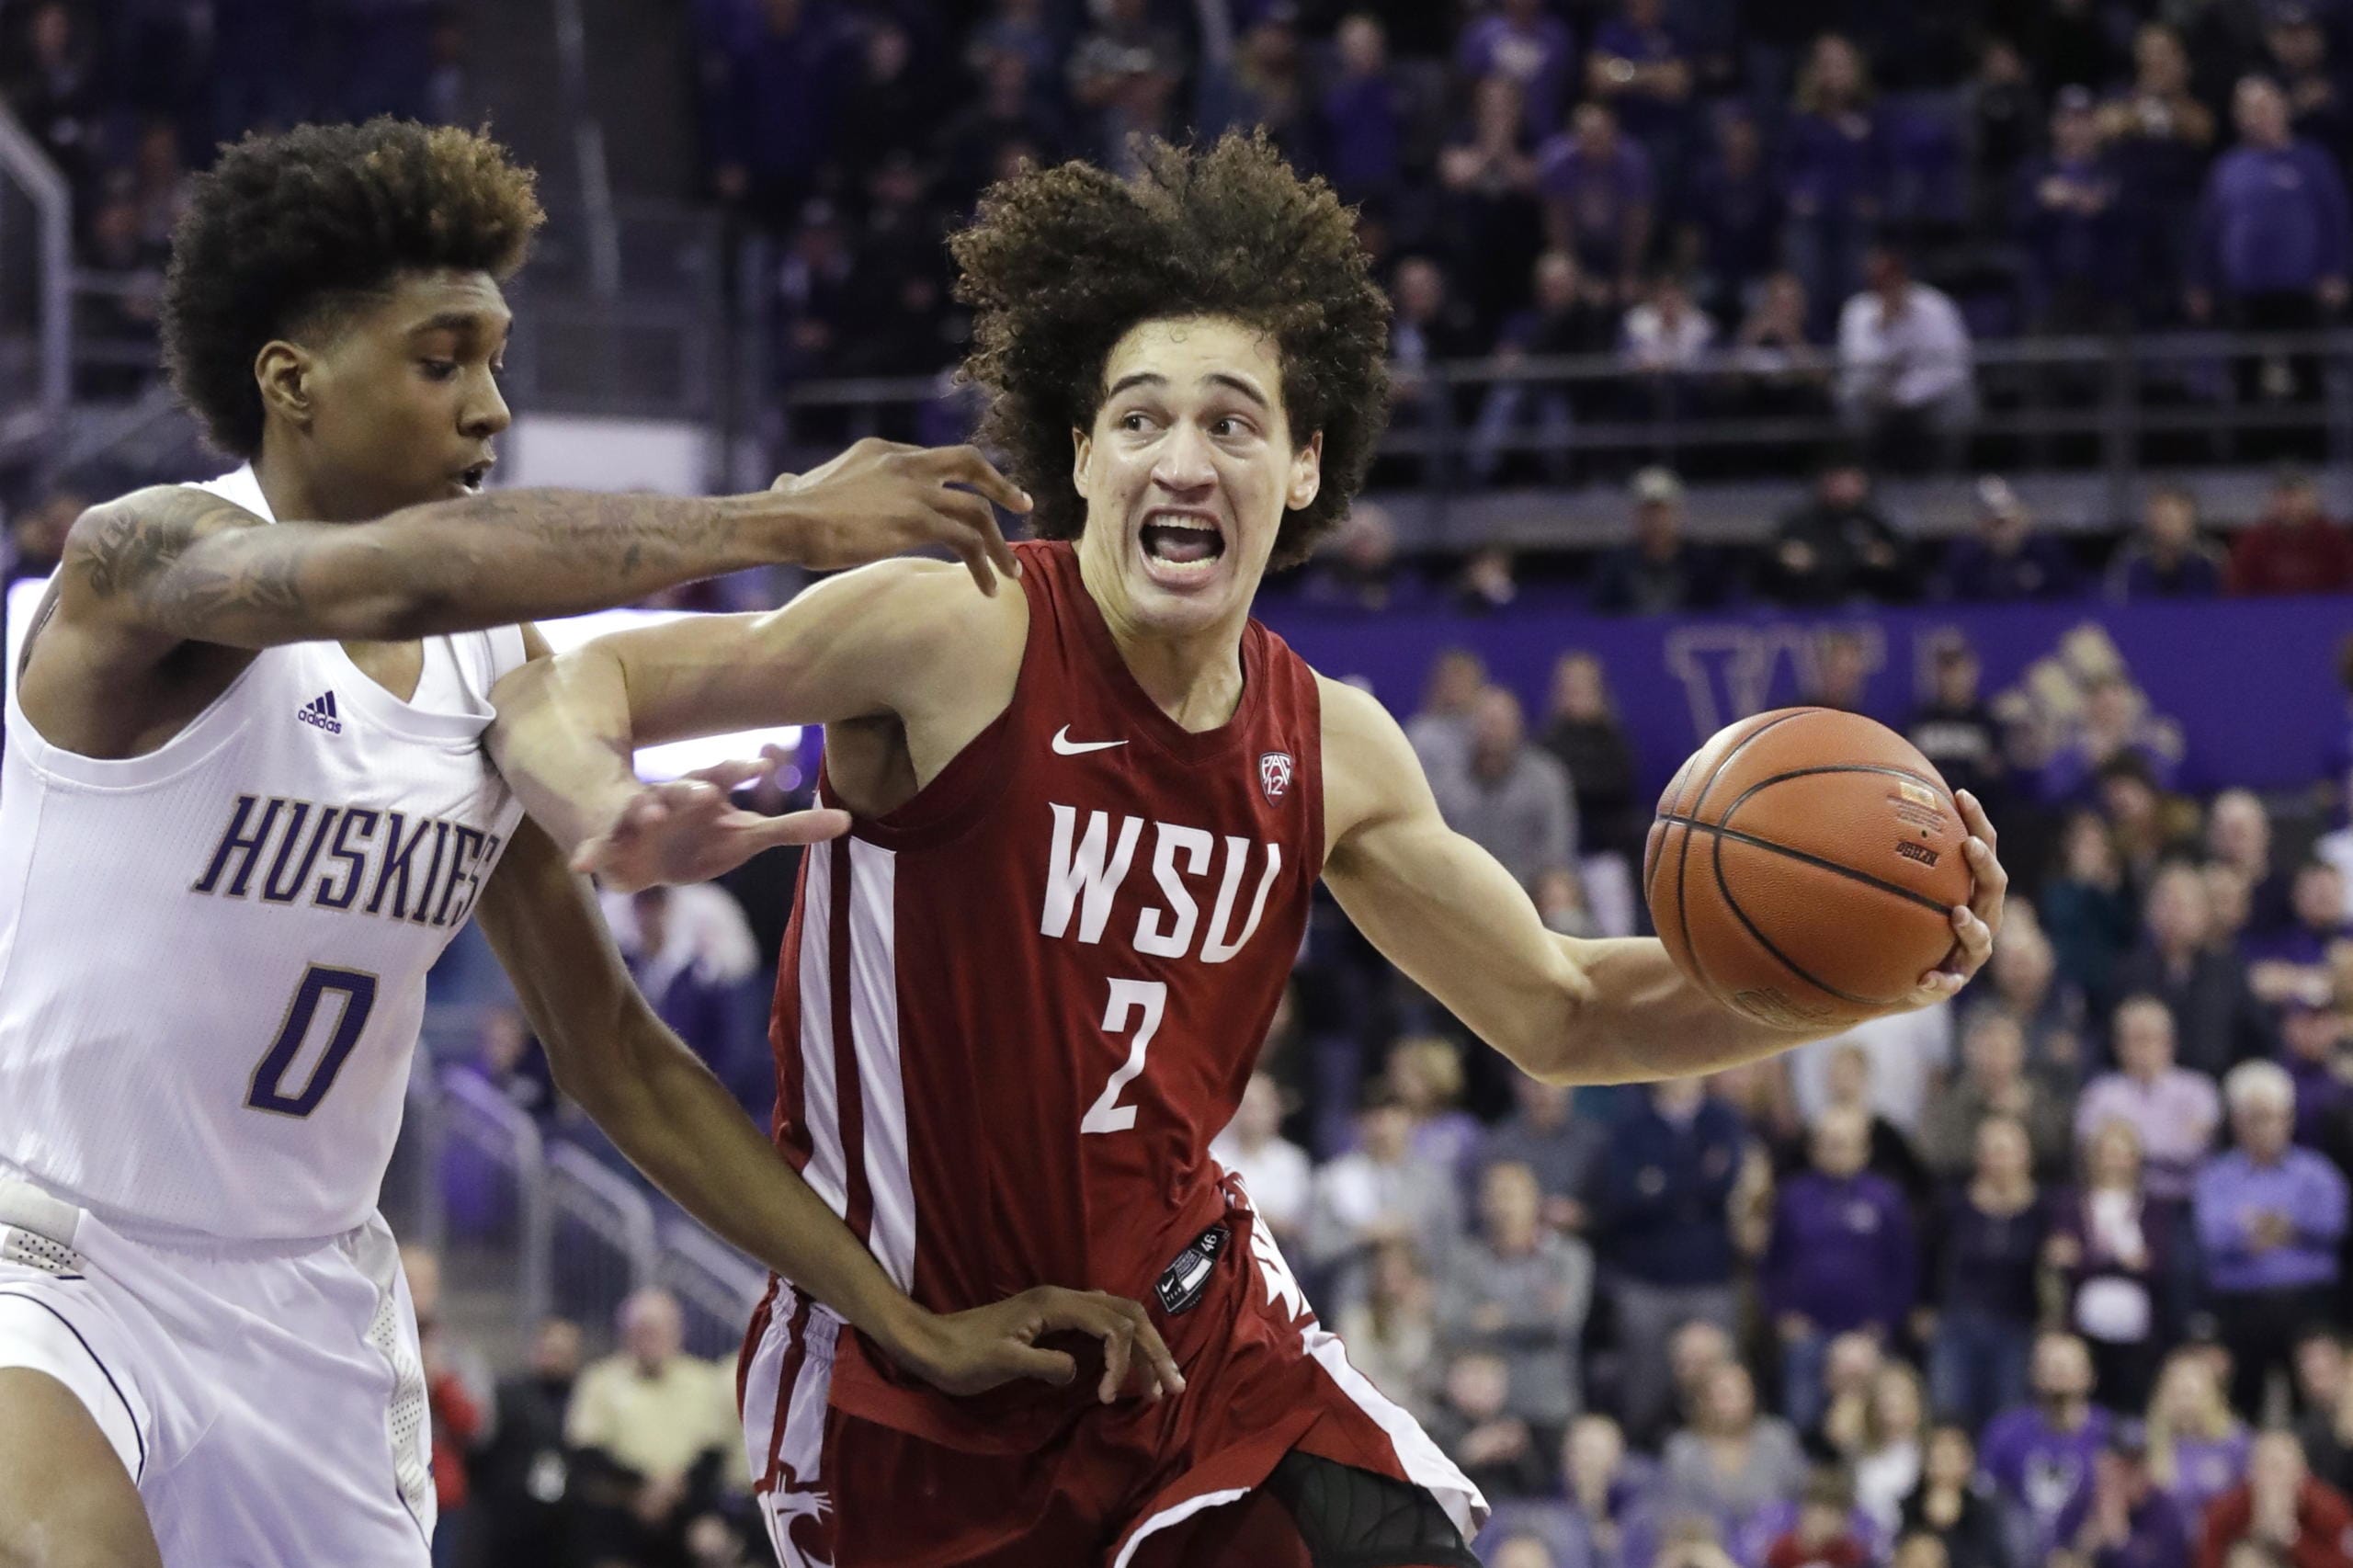 Washington State's CJ Elleby (2) drives against Washington's Jaden McDaniels (0) during the second half of an NCAA college basketball game Friday, Feb. 28, 2020, in Seattle. Washington State won 78-74.